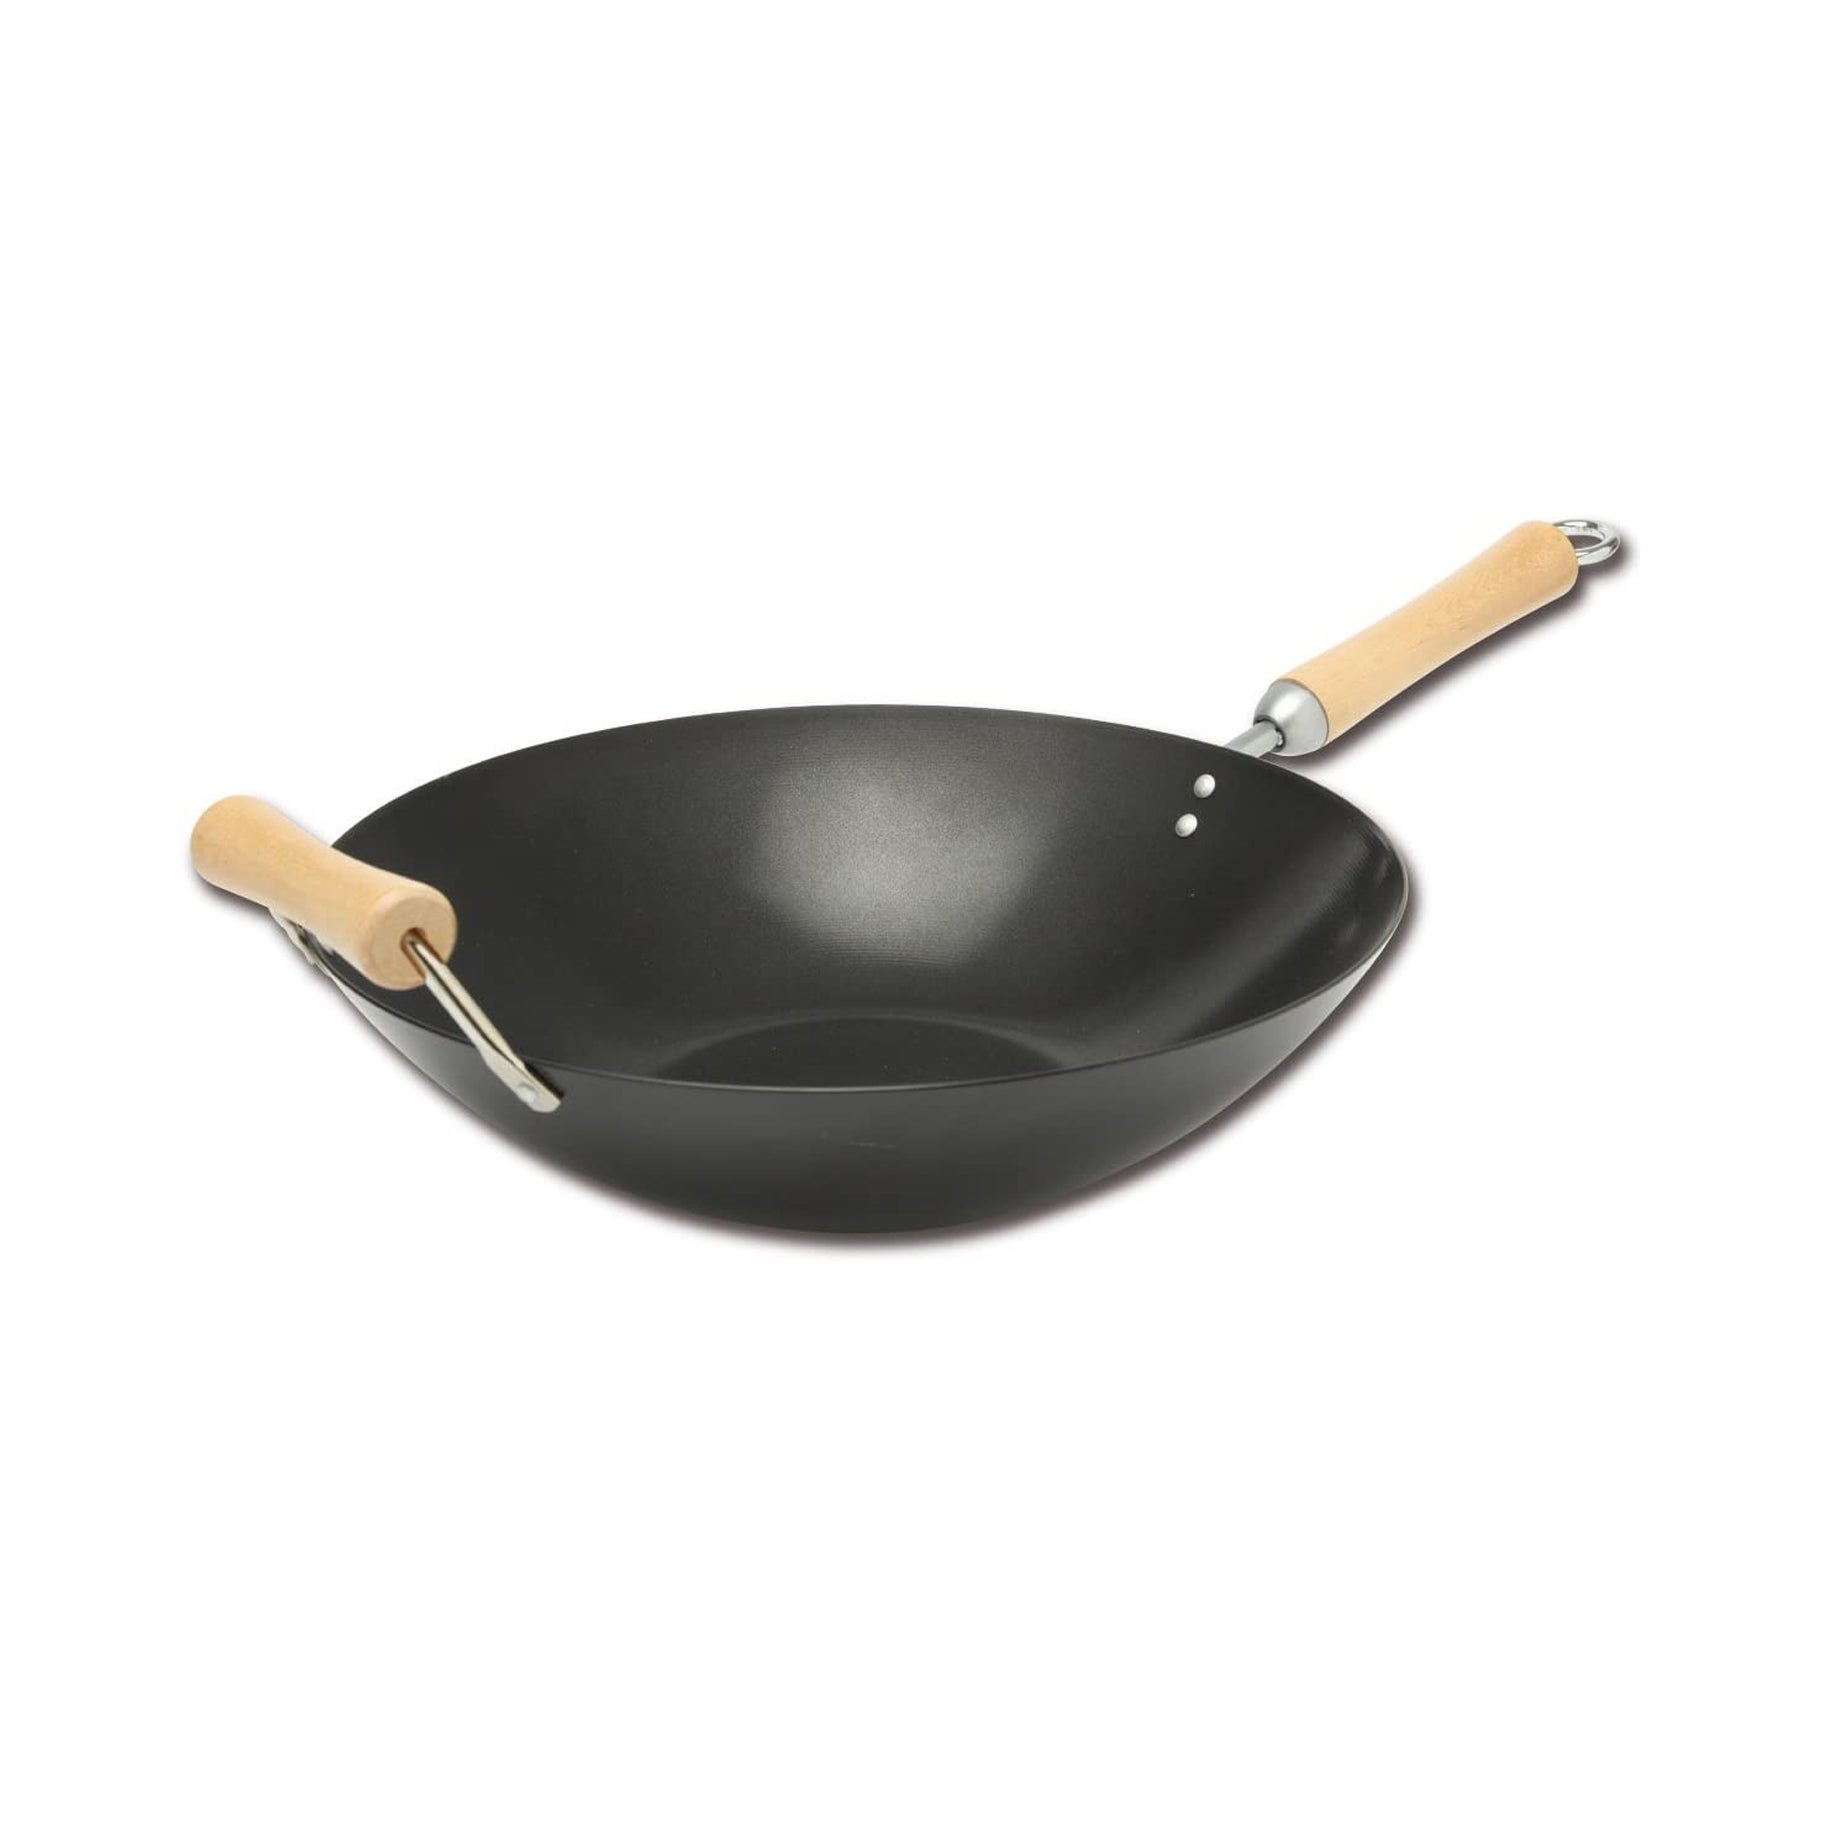 Helen's Asian Kitchen Wok, Carbon Steel and Bamboo, 14-Inches